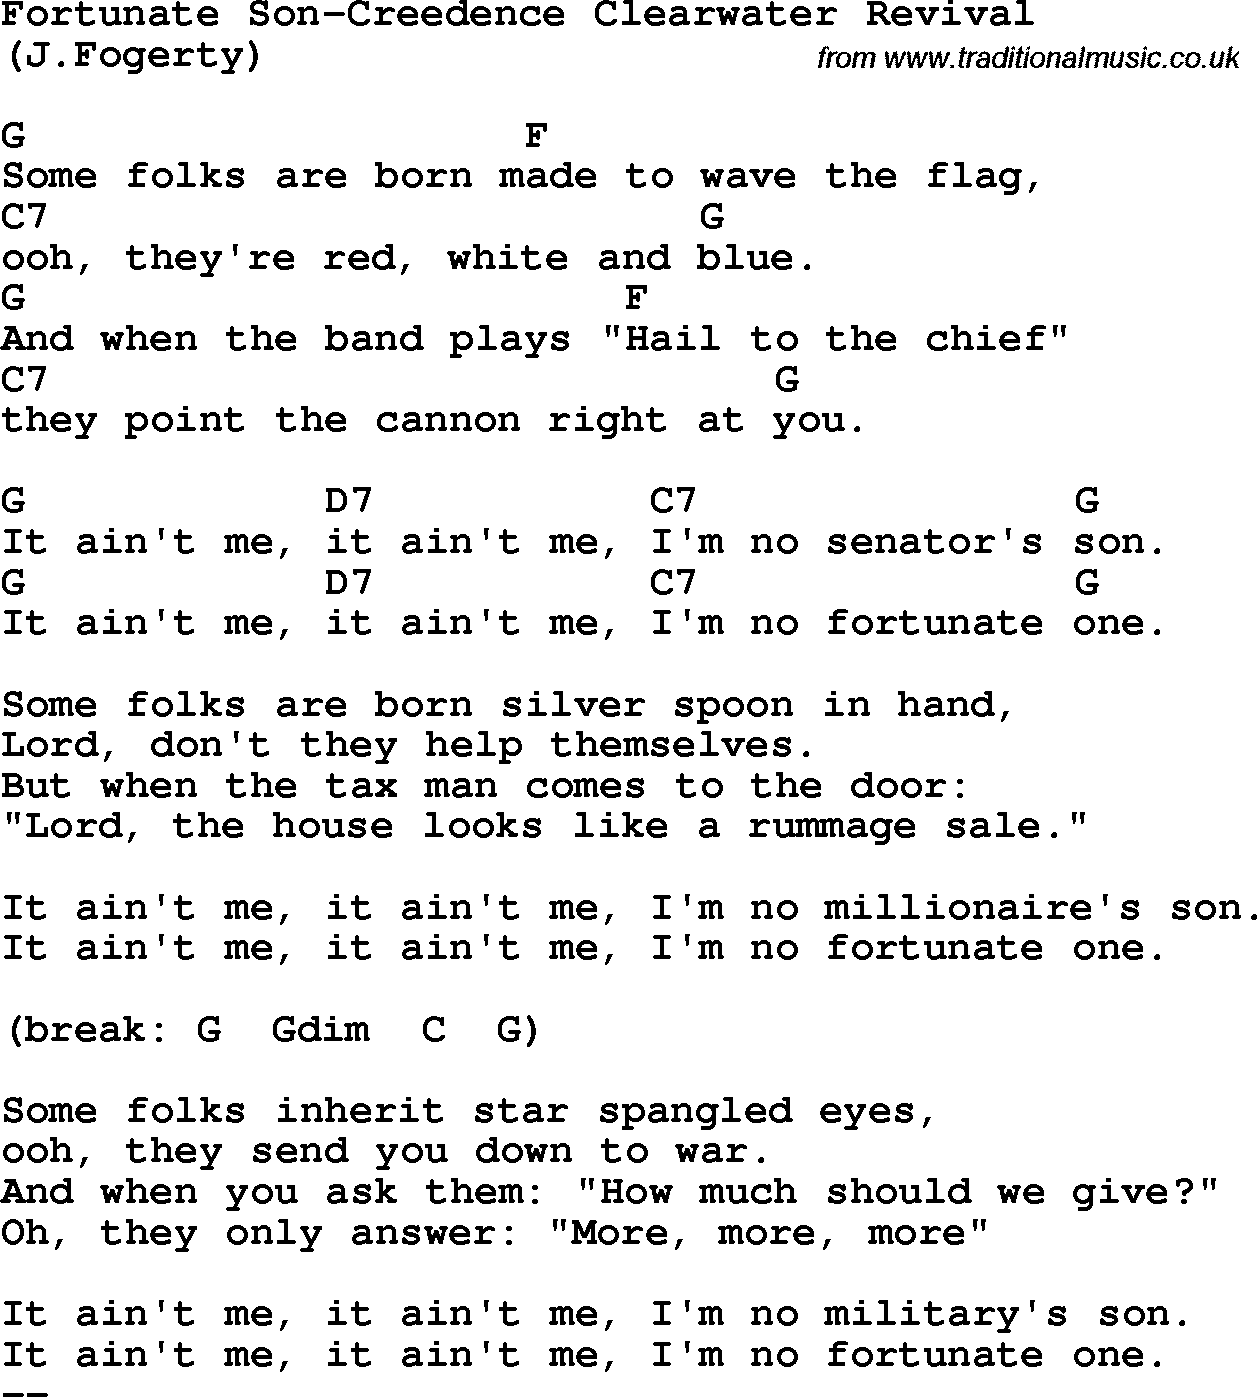 Protest Song Fortunate Son-Creedence Clearwater Revival lyrics and chords